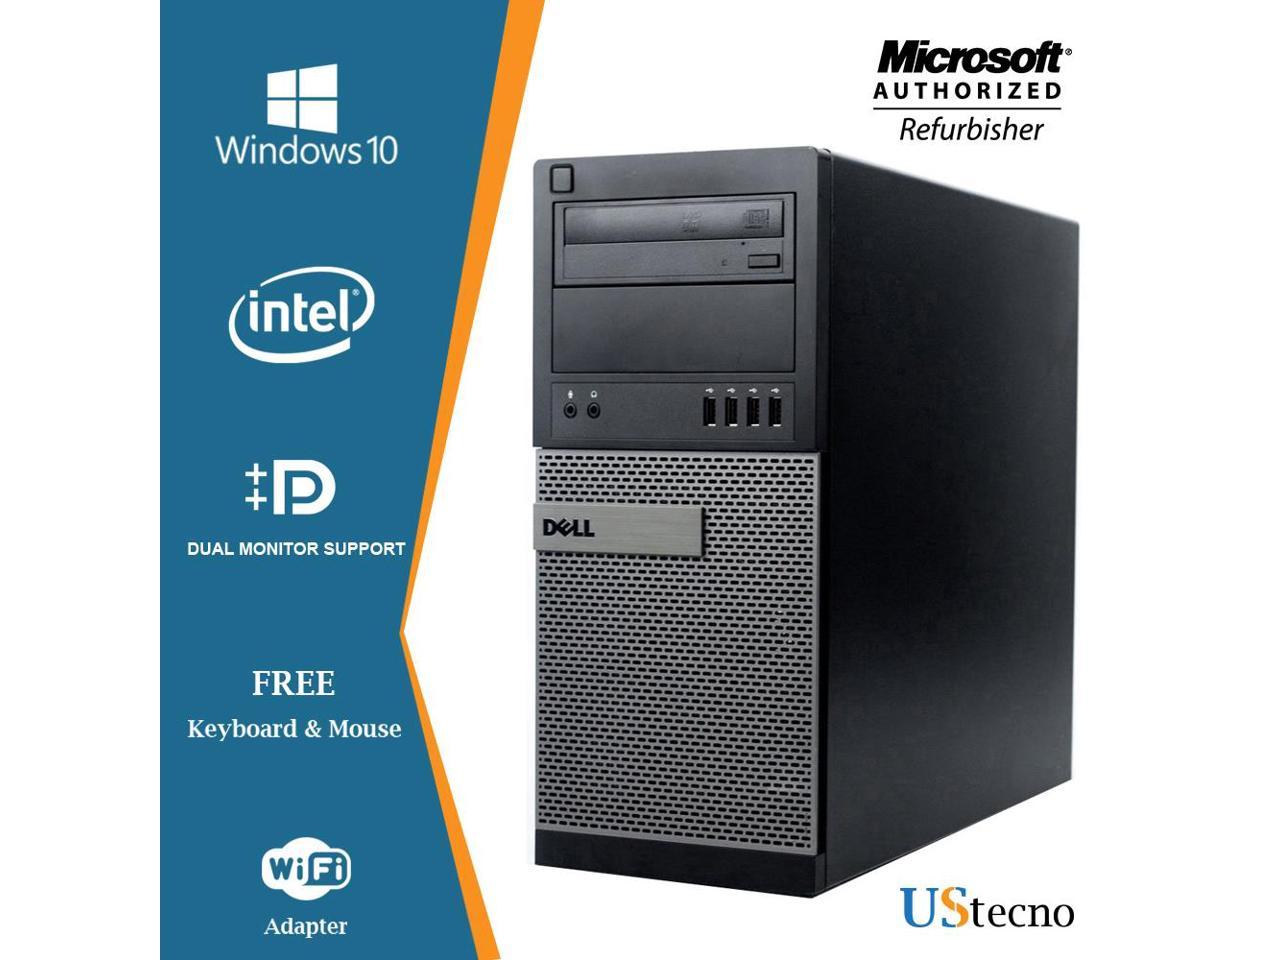 Dell Optiplex 9020 Tower Desktop Computer Intel Core i5 4570 16GB 1TB HDD DVD Windows 10 Home New Free Keyboard, Mouse,Power cord,WiFi Adapter